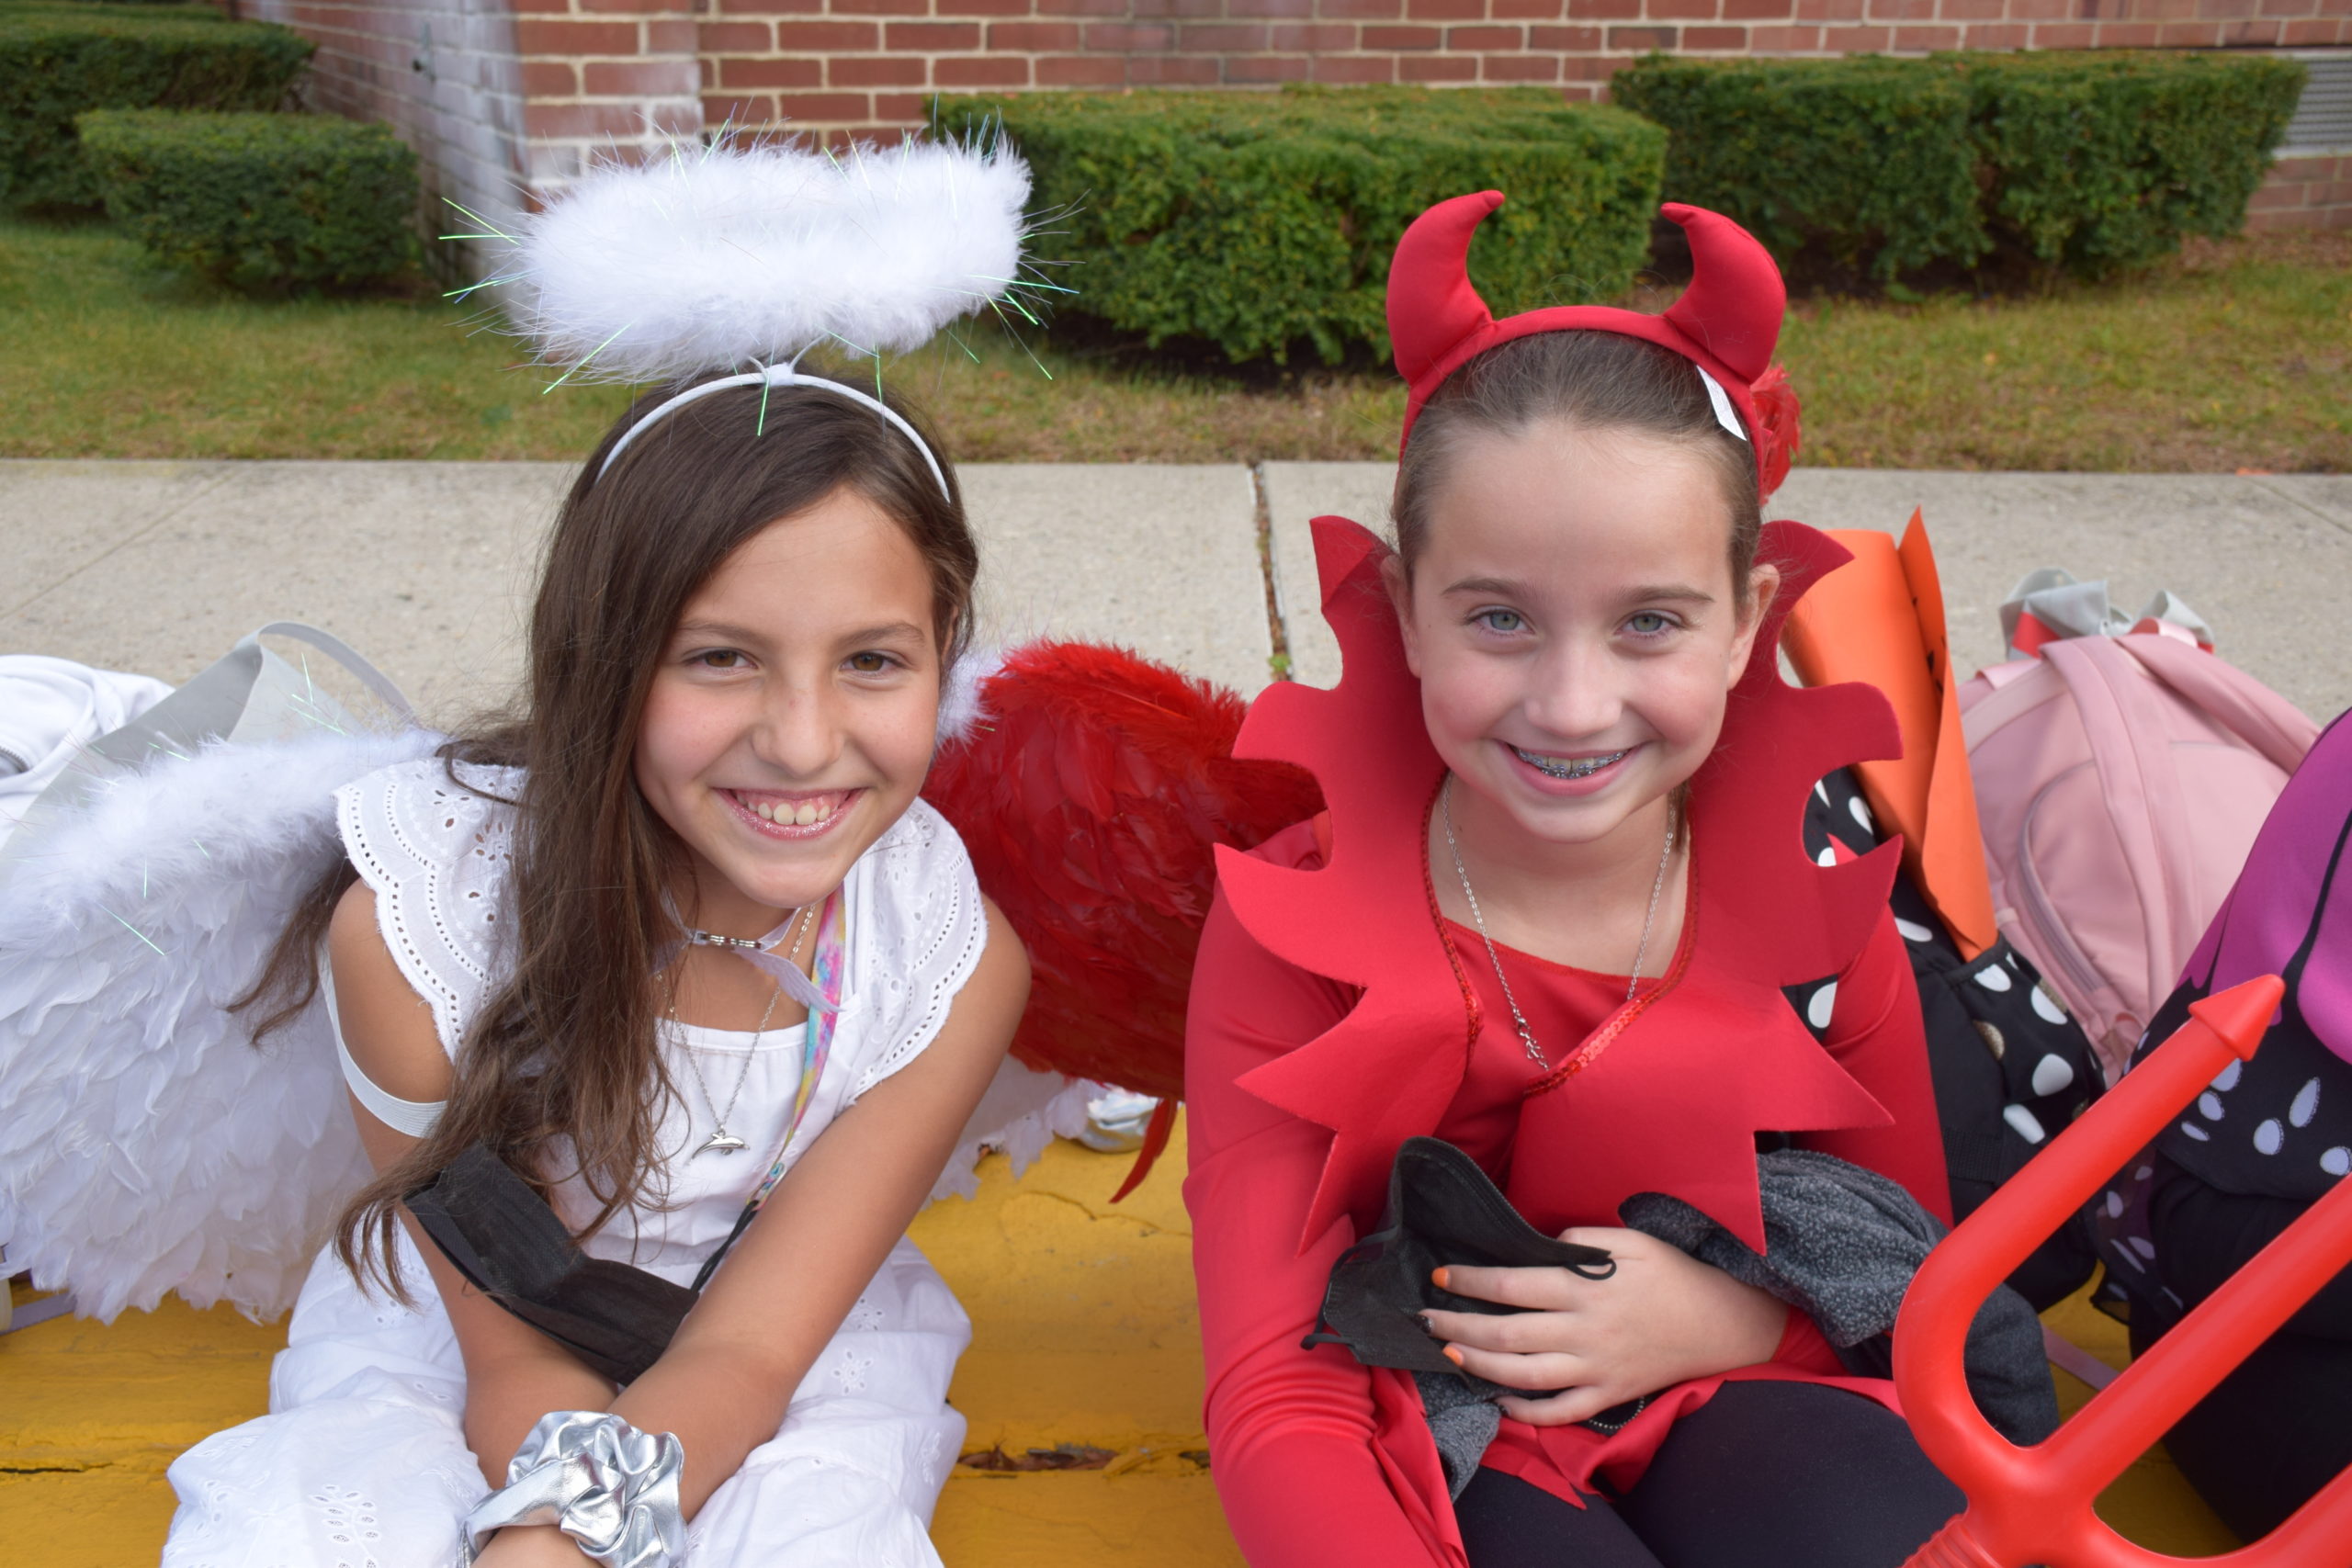 Wearing bright smiles and colorful costumes, Hampton Bays Elementary School students paraded around the school’s bus loop on October 29 for the school’s annual Harvest Parade. A crowd of onlookers cheered as the students — dressed as princesses, superheroes and spooky characters — marched and waved as the sounds of traditional Halloween music played in the background.